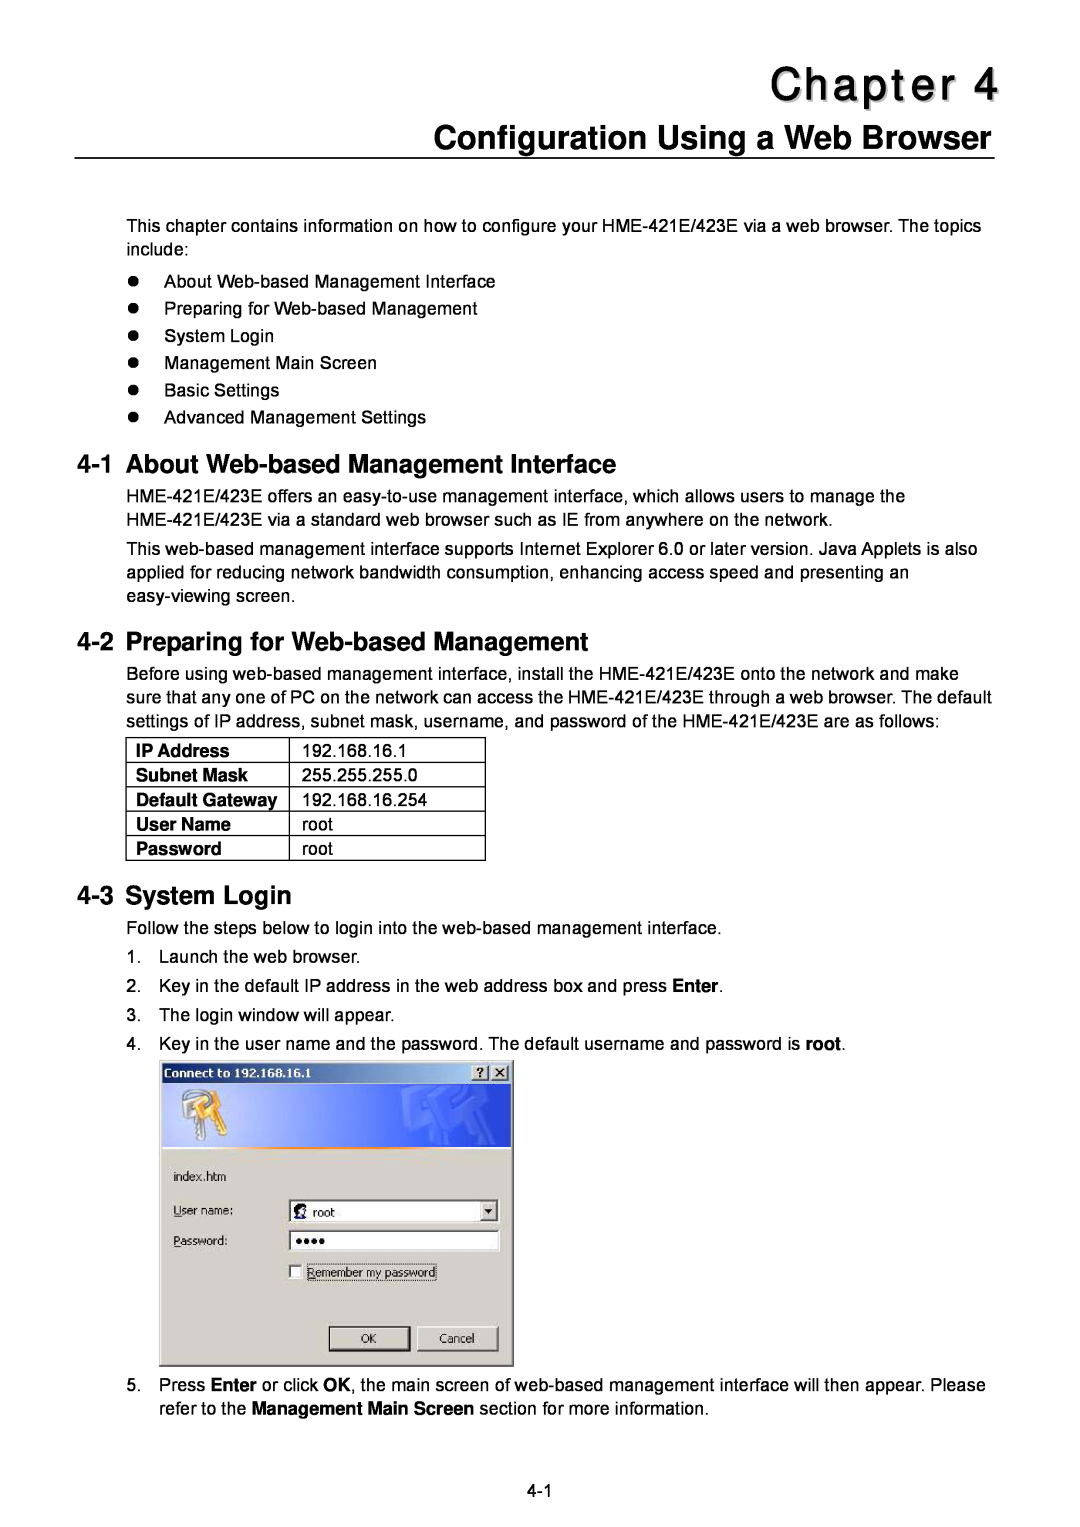 Husky HME-423E Configuration Using a Web Browser, About Web-based Management Interface, Preparing for Web-based Management 